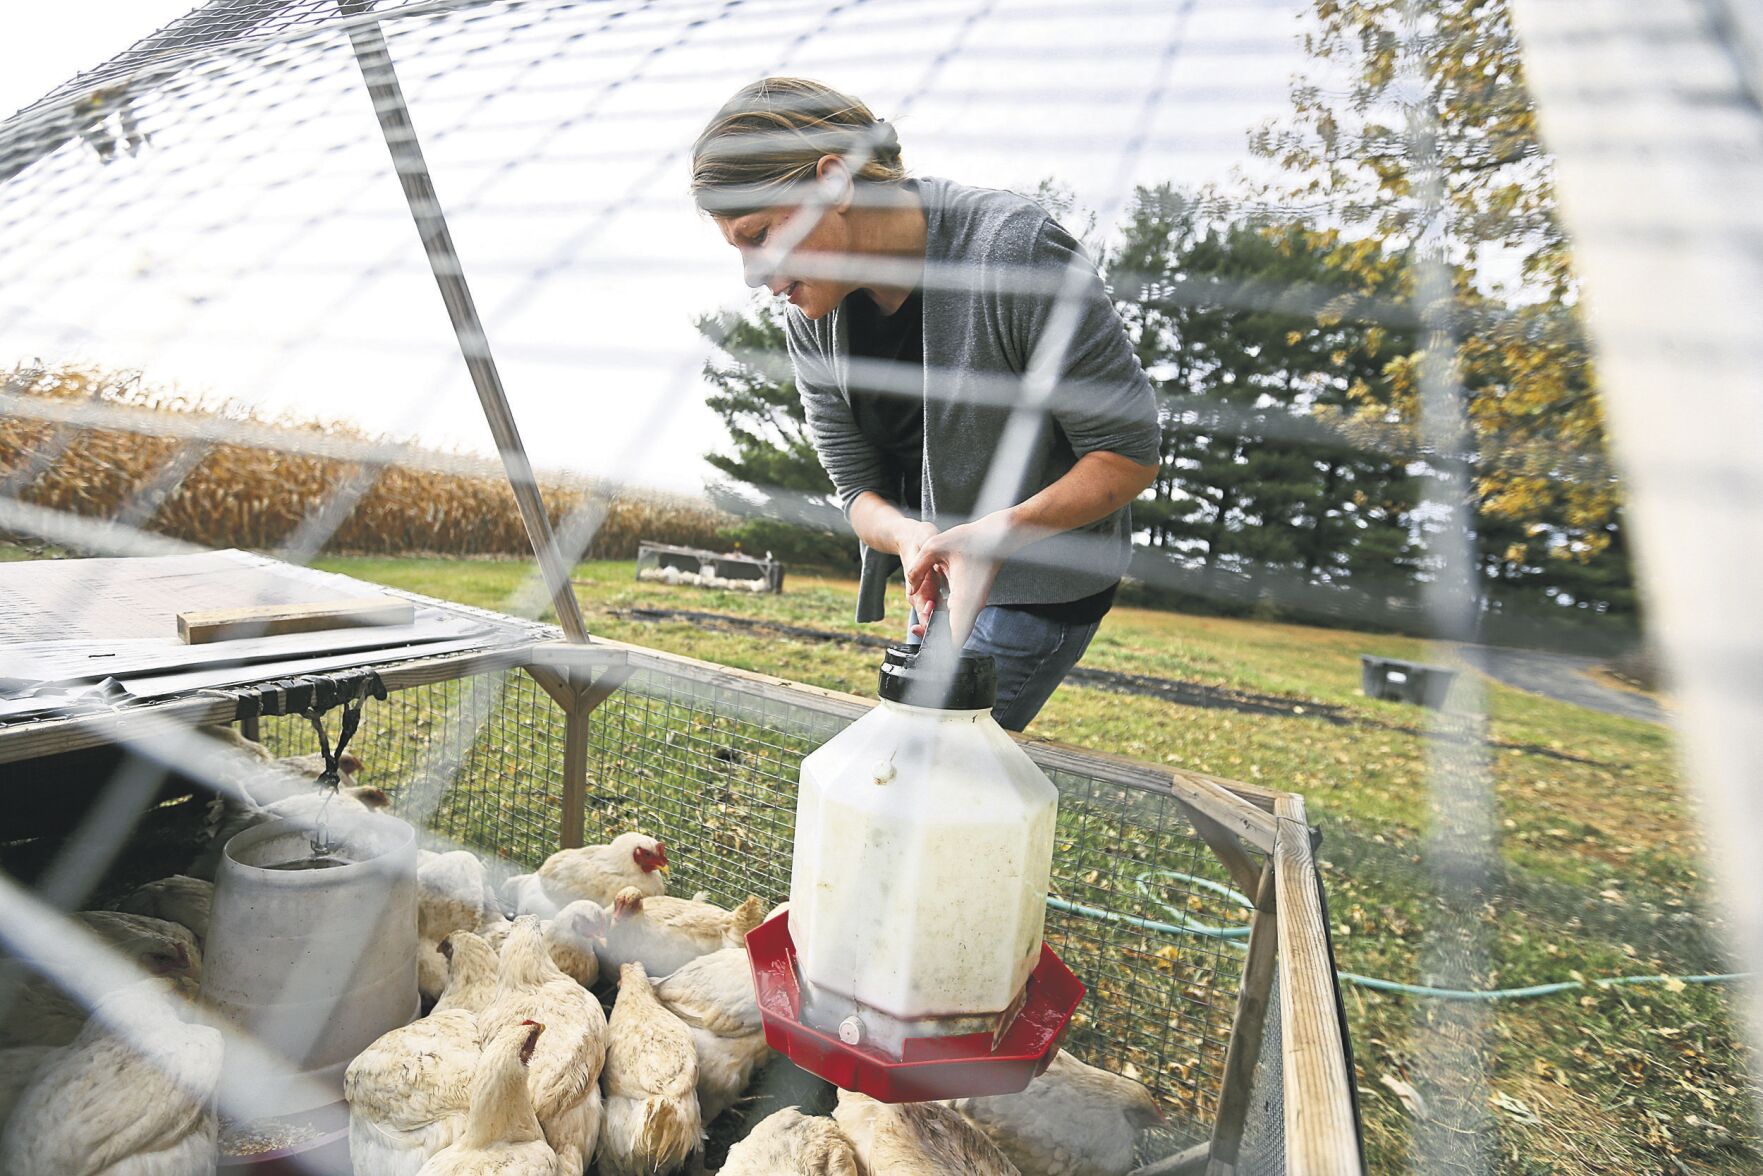 Becky Milum gives water to Cornish cross chickens at The Roost in rural Bernard, Iowa.    PHOTO CREDIT: JESSICA REILLY